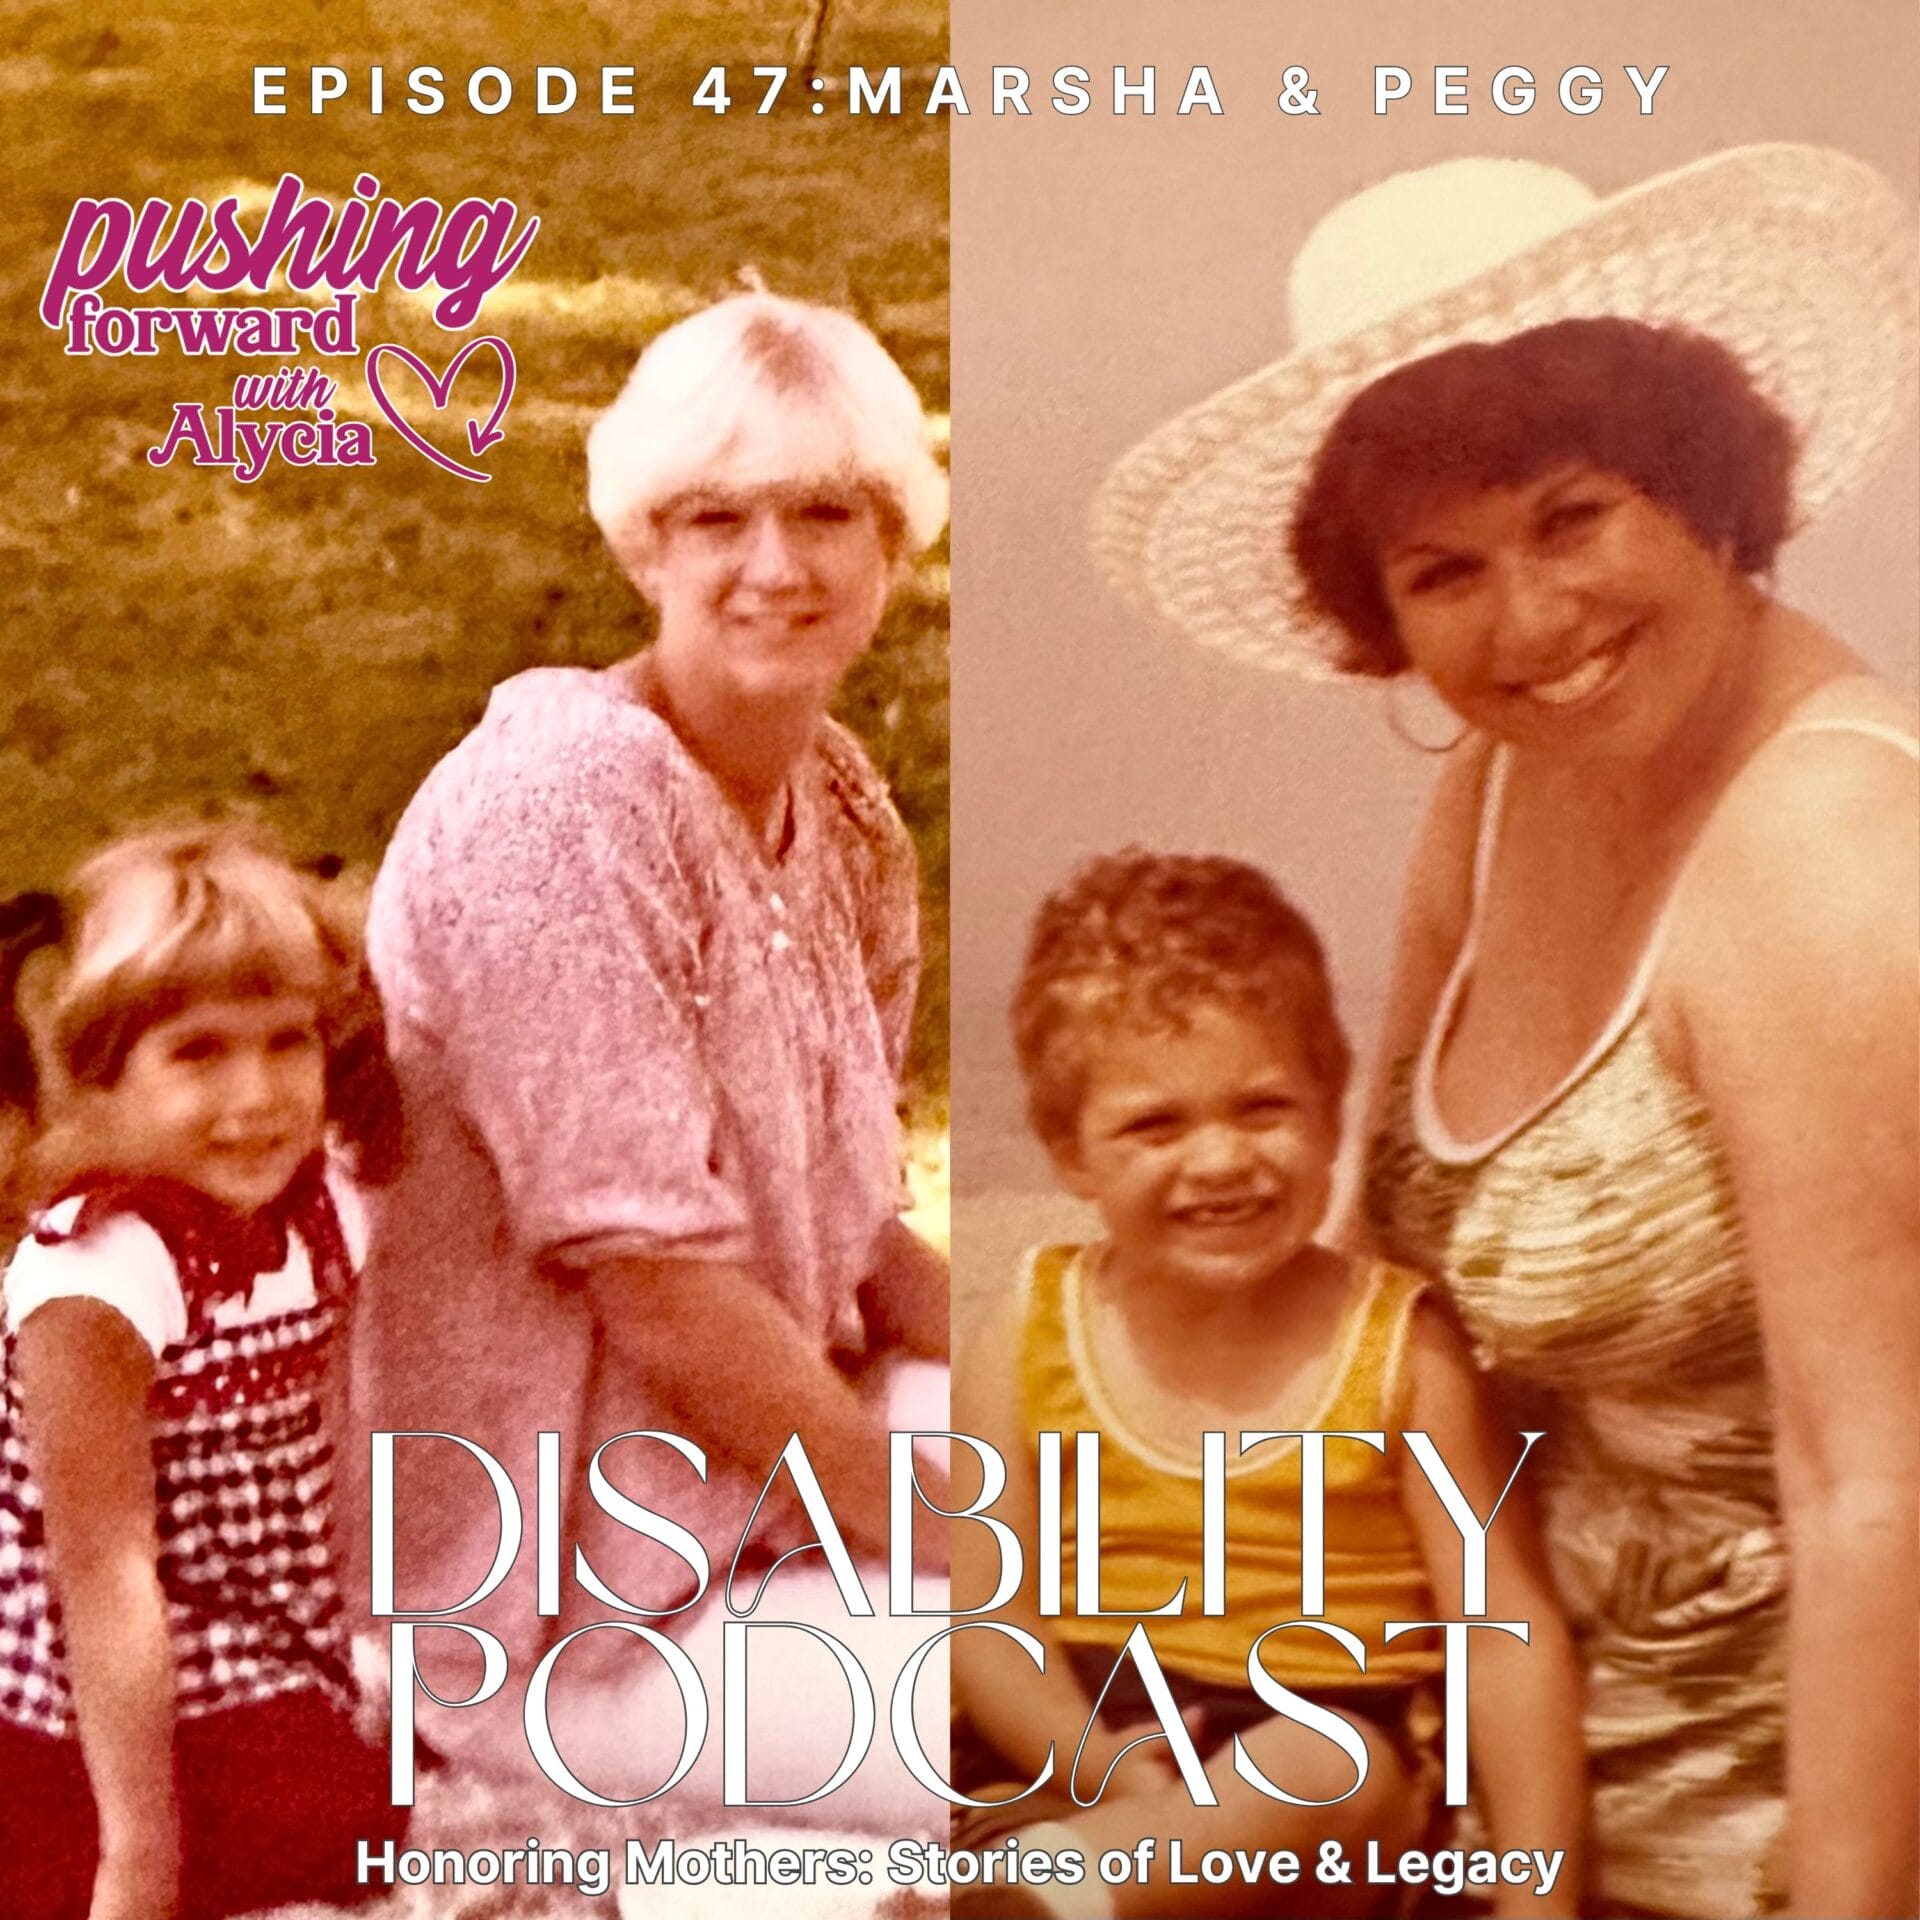 marty and alycia share the stories of their moms on the mothers day episode of pushing forward with alycia